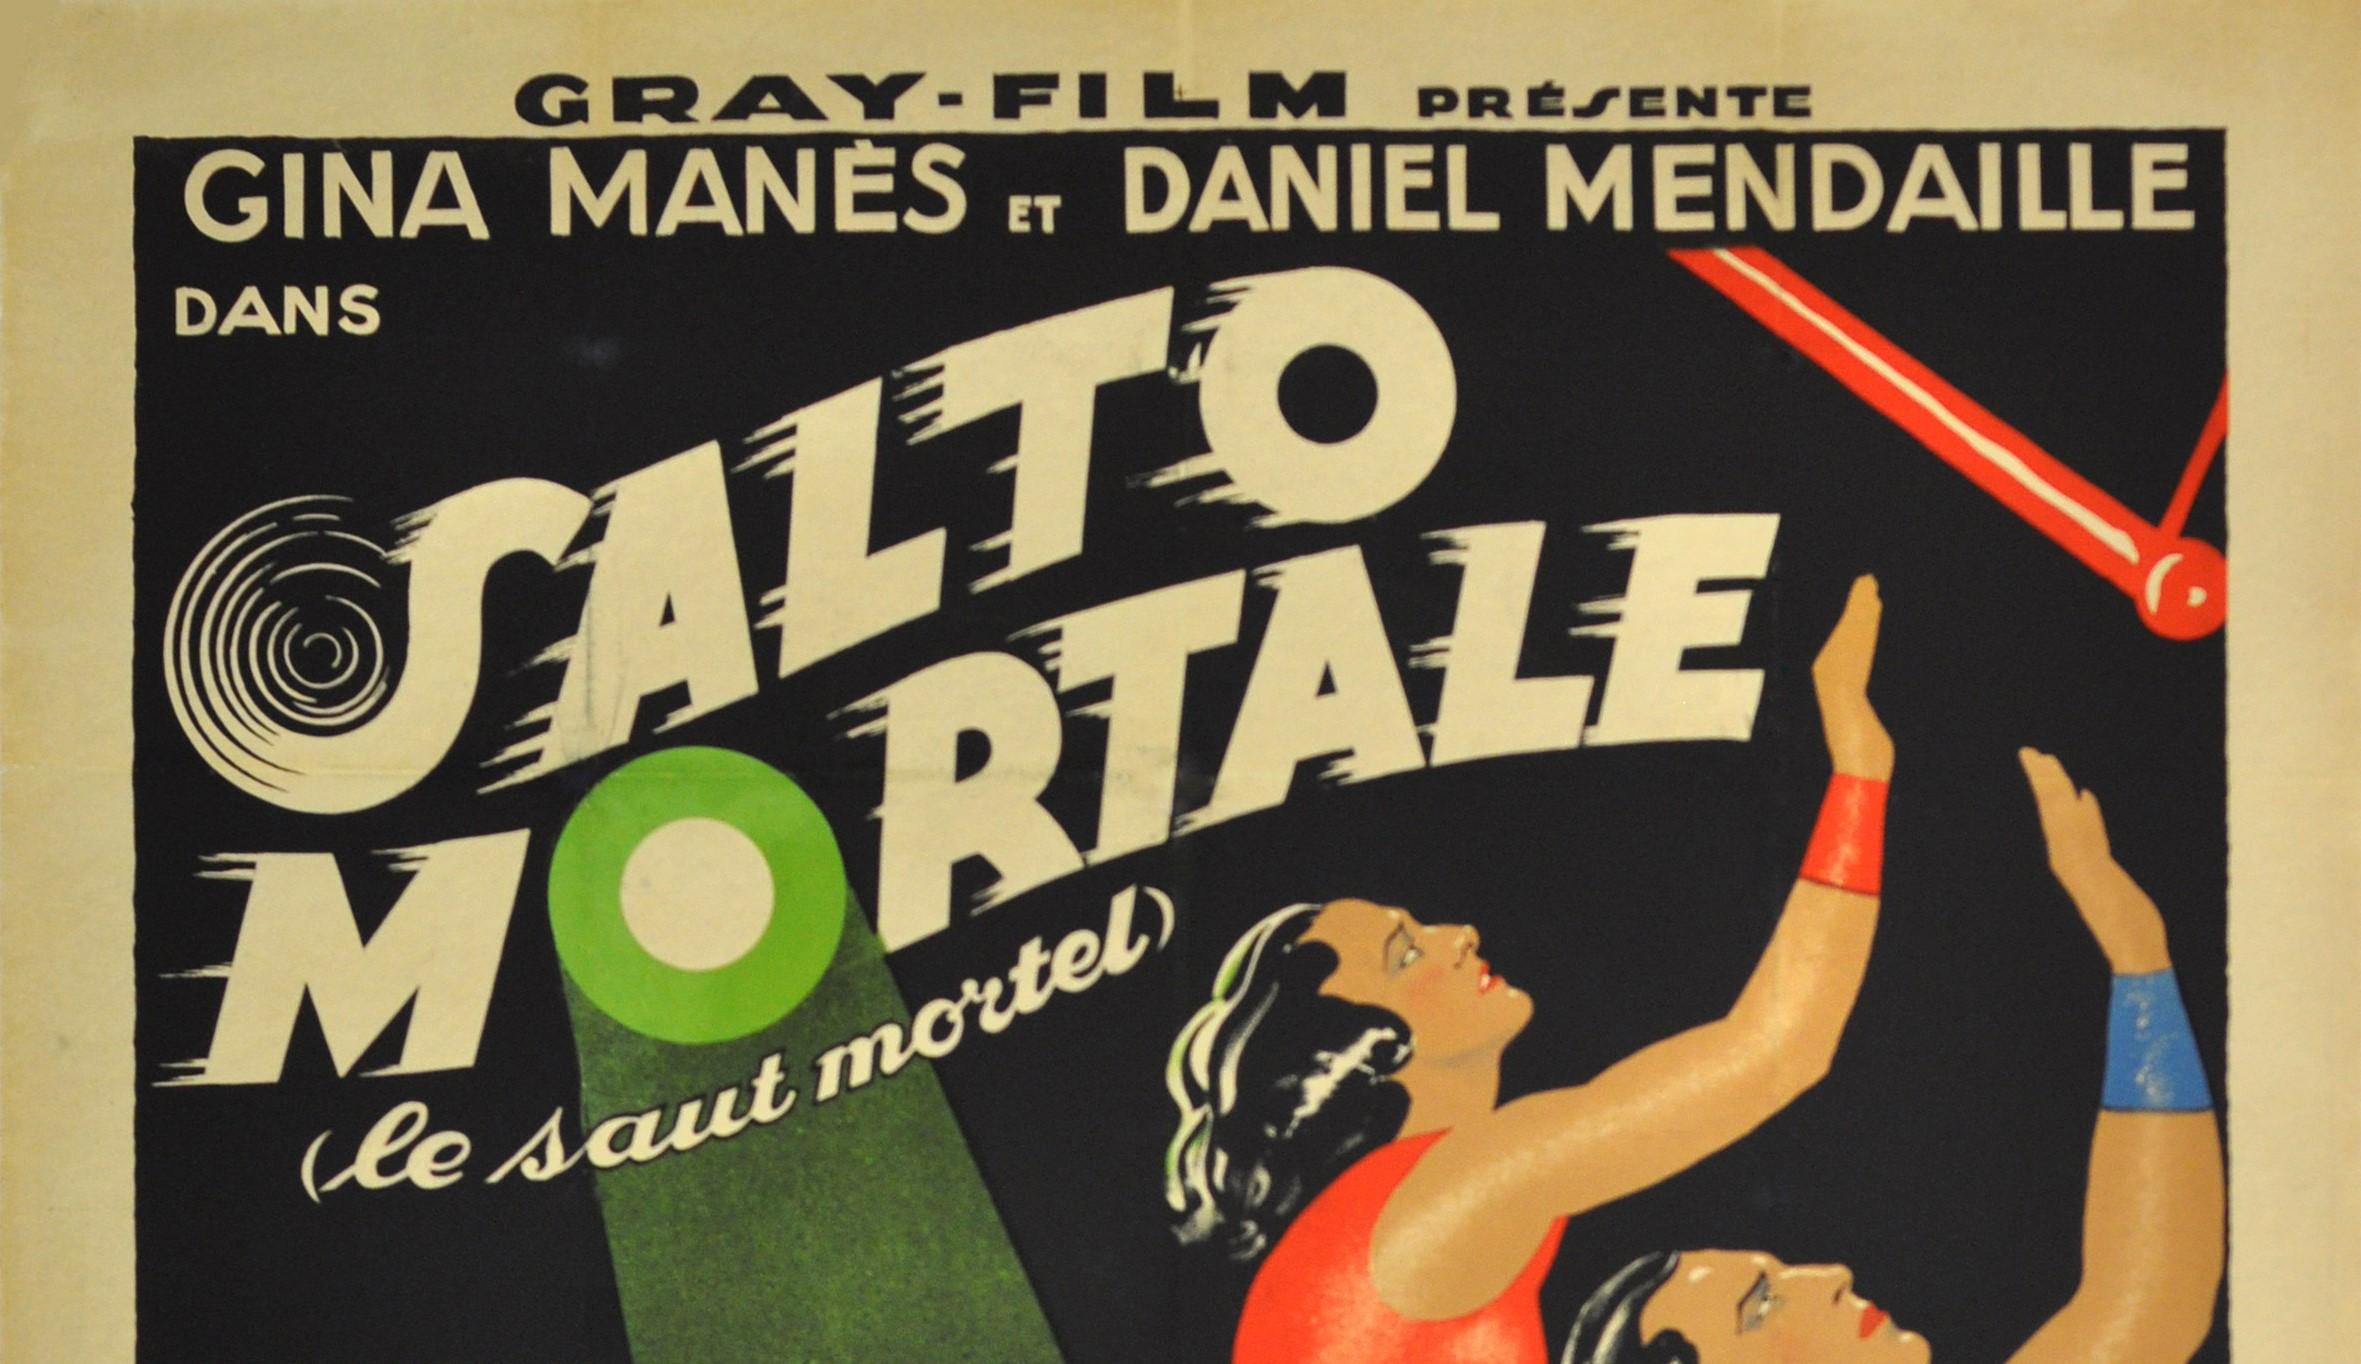 Original vintage cinema poster for a circus drama film Salto Mortale (le saut mortel)/Trapeze (the fatal leap) directed by the German director Ewald Andre Dupont and based on a novel by the French author and actor Alfred Machard. Stunning dynamic